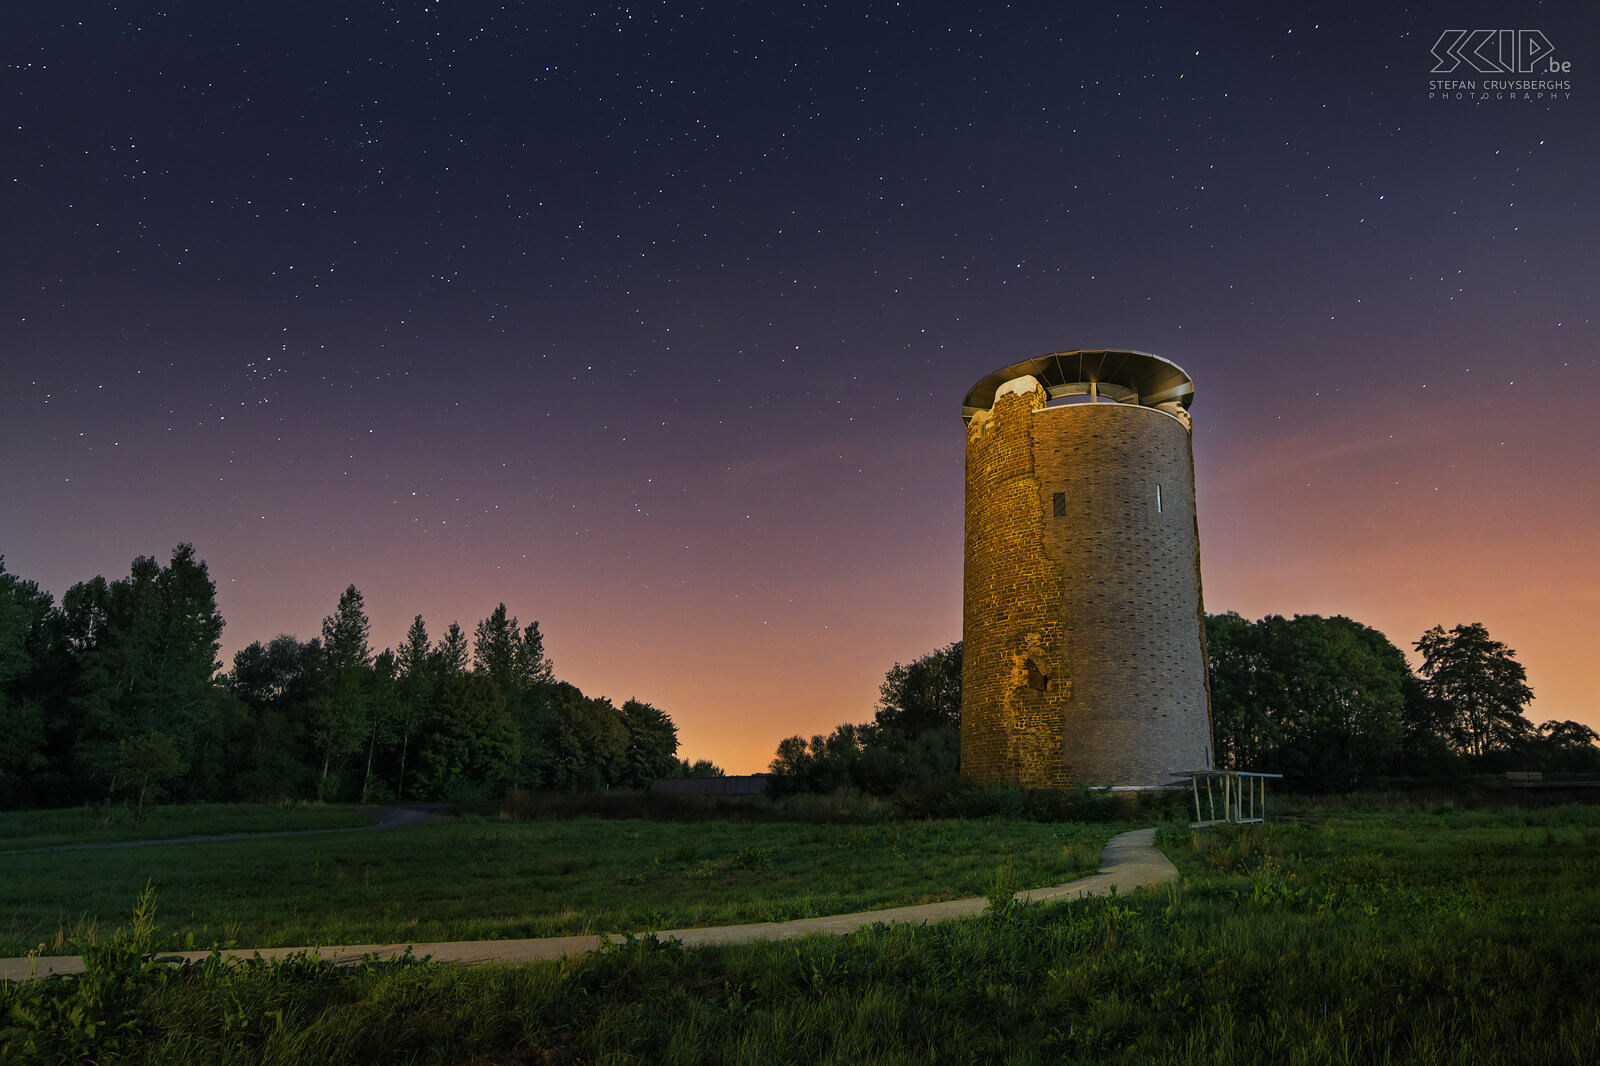 Hageland by night - Virgin Tower of Zichem The Virgin Tower of Zichem (Scherpenheuvel-Zichem) on the bank of the Demer river. This tower was built in the 14th century. In 2006 a part collapsed and in 2015 the restoration work was completed. Stefan Cruysberghs